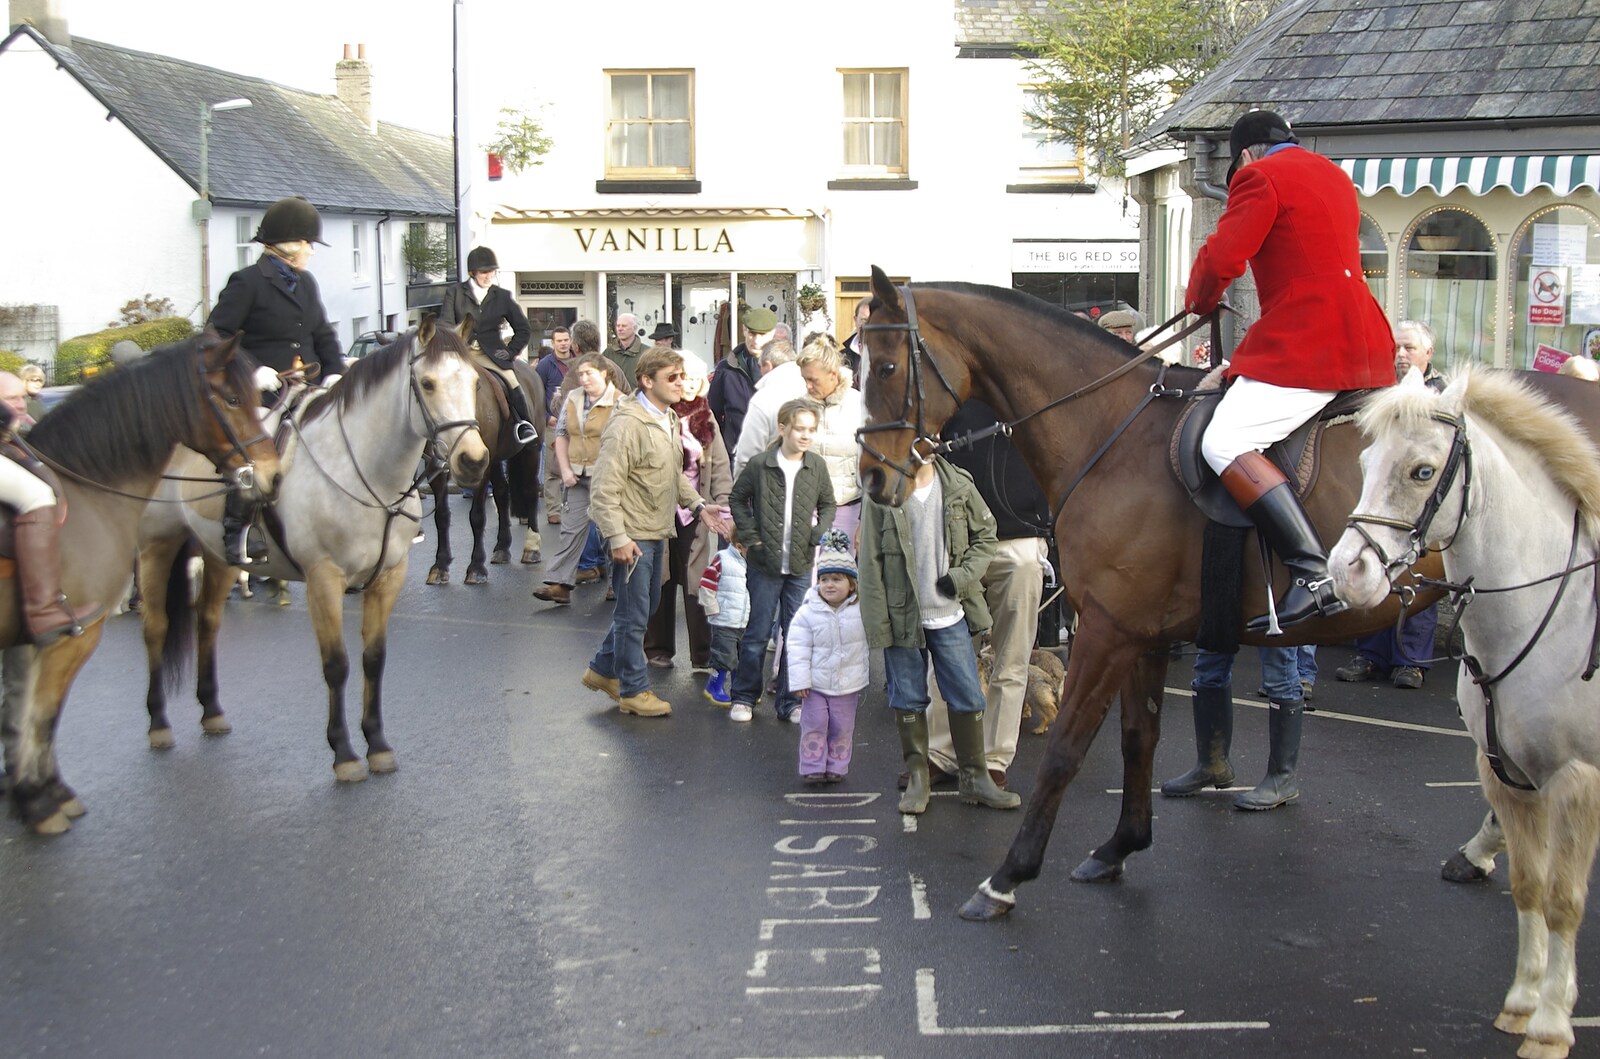 The scene in the square from A Boxing Day Hunt, Chagford, Devon - 26th December 2007